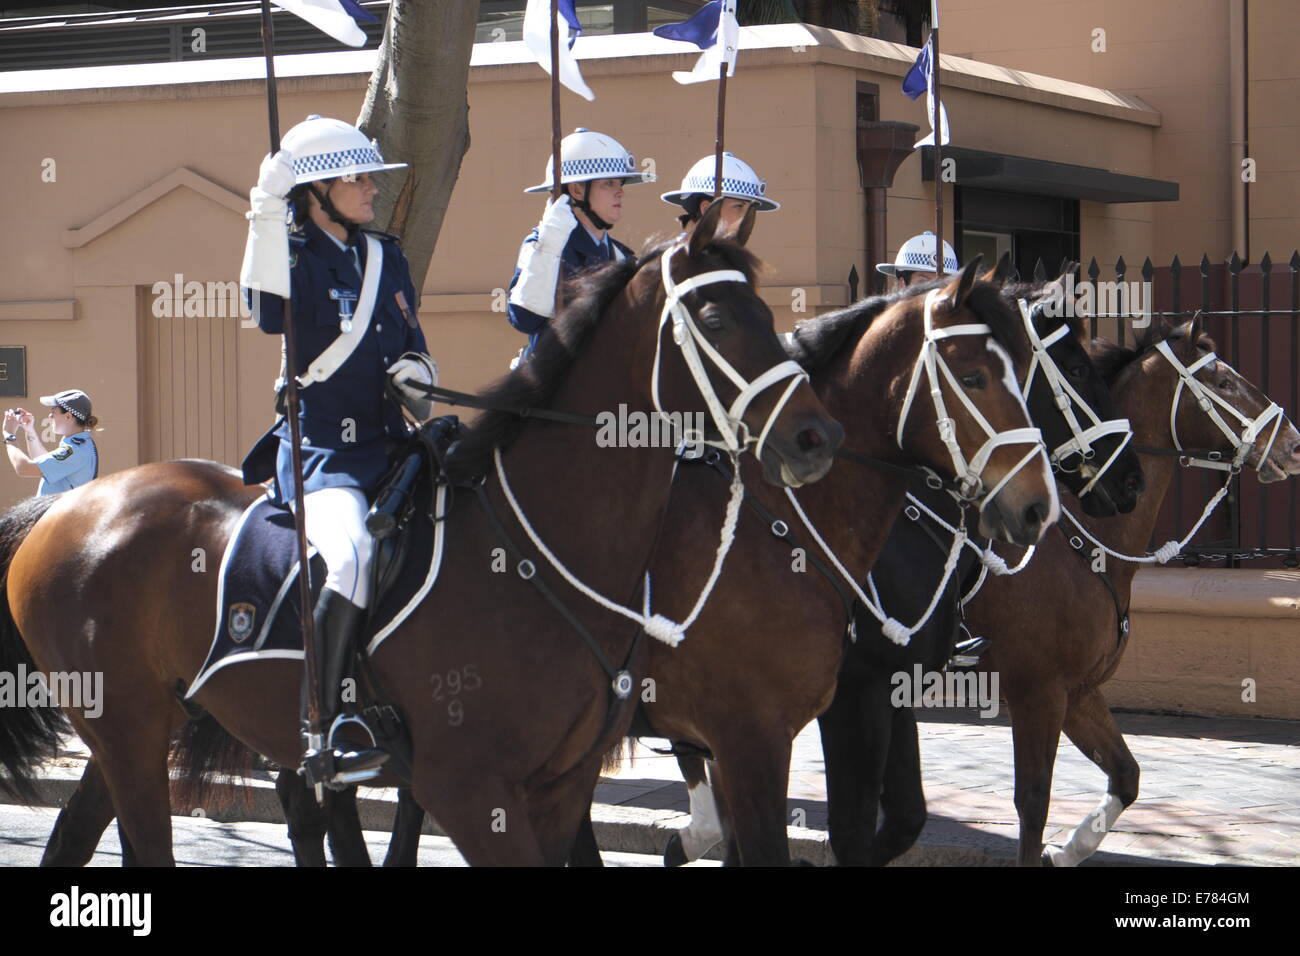 Sydney, Australia. 09th Sep, 2014. The Governor of New South Wales, Dame Marie Bashir, is honoured by the New South Wales Parliament as she prepares to retire from public life. Accompanied by an honour guard the Governor officially opened the 55th session of State Parliament Credit:  martin berry/Alamy Live News Stock Photo